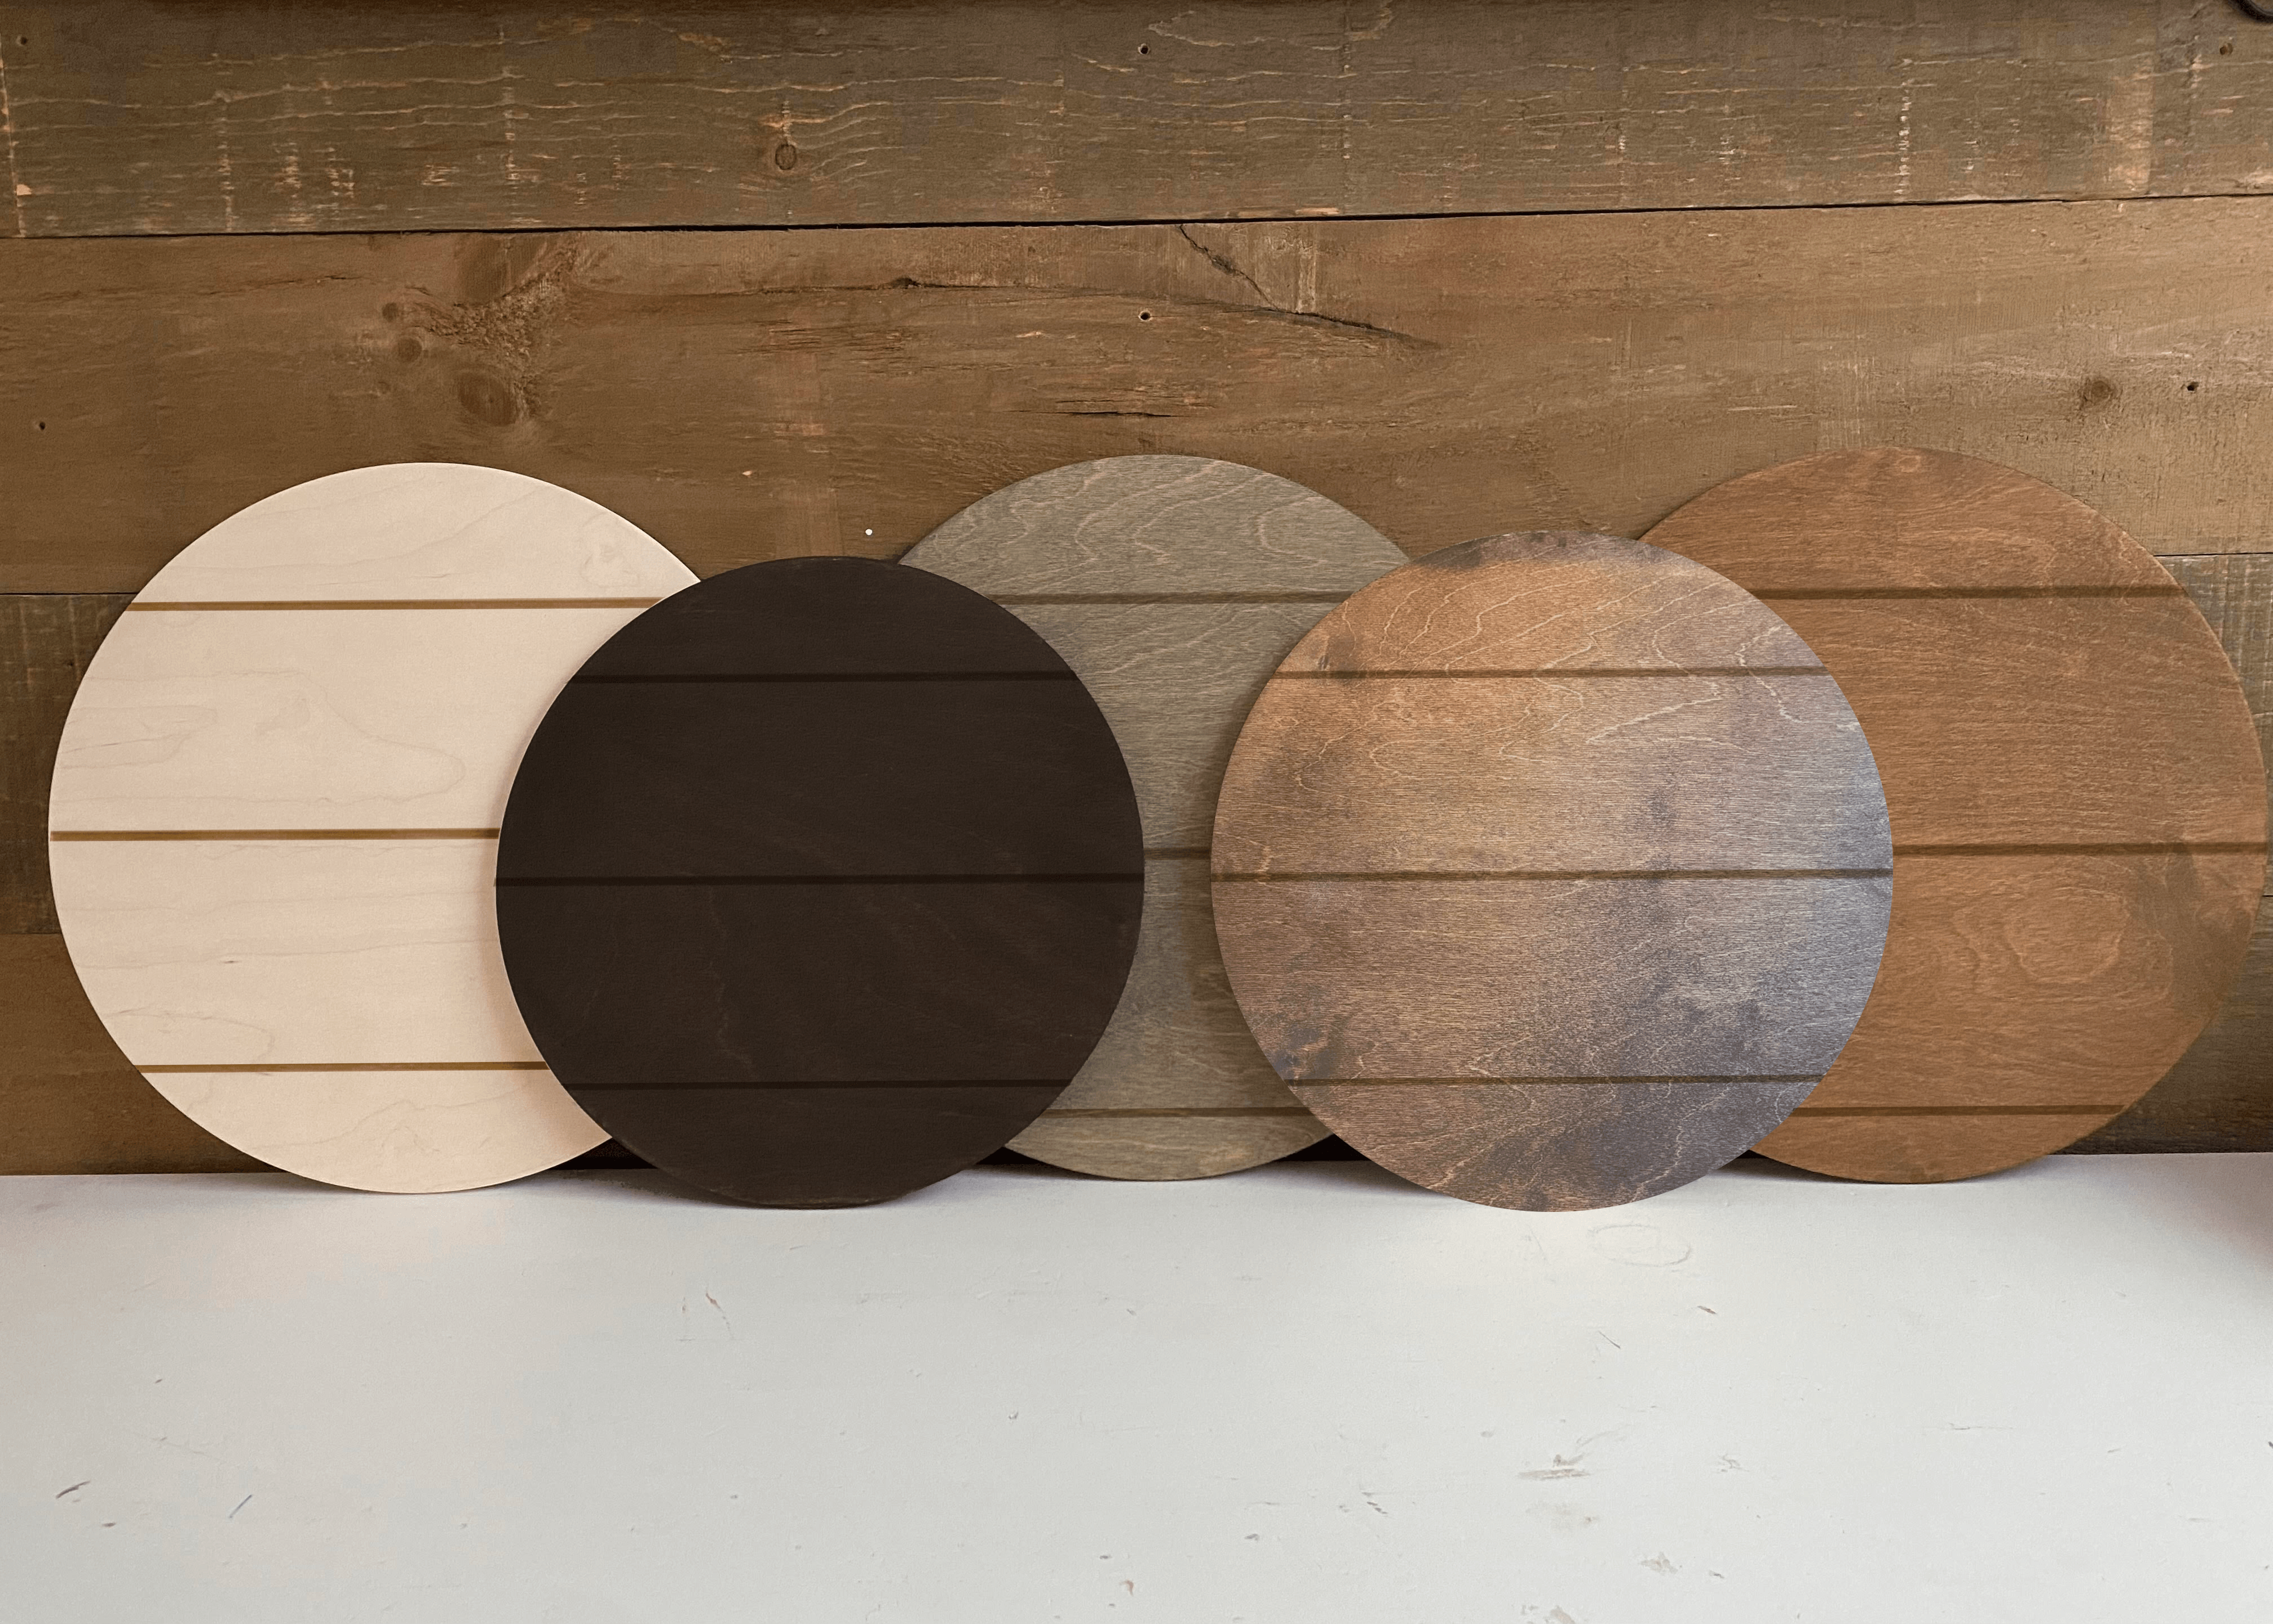 Pre-Stained Shiplap Wood Round - Blank Supply